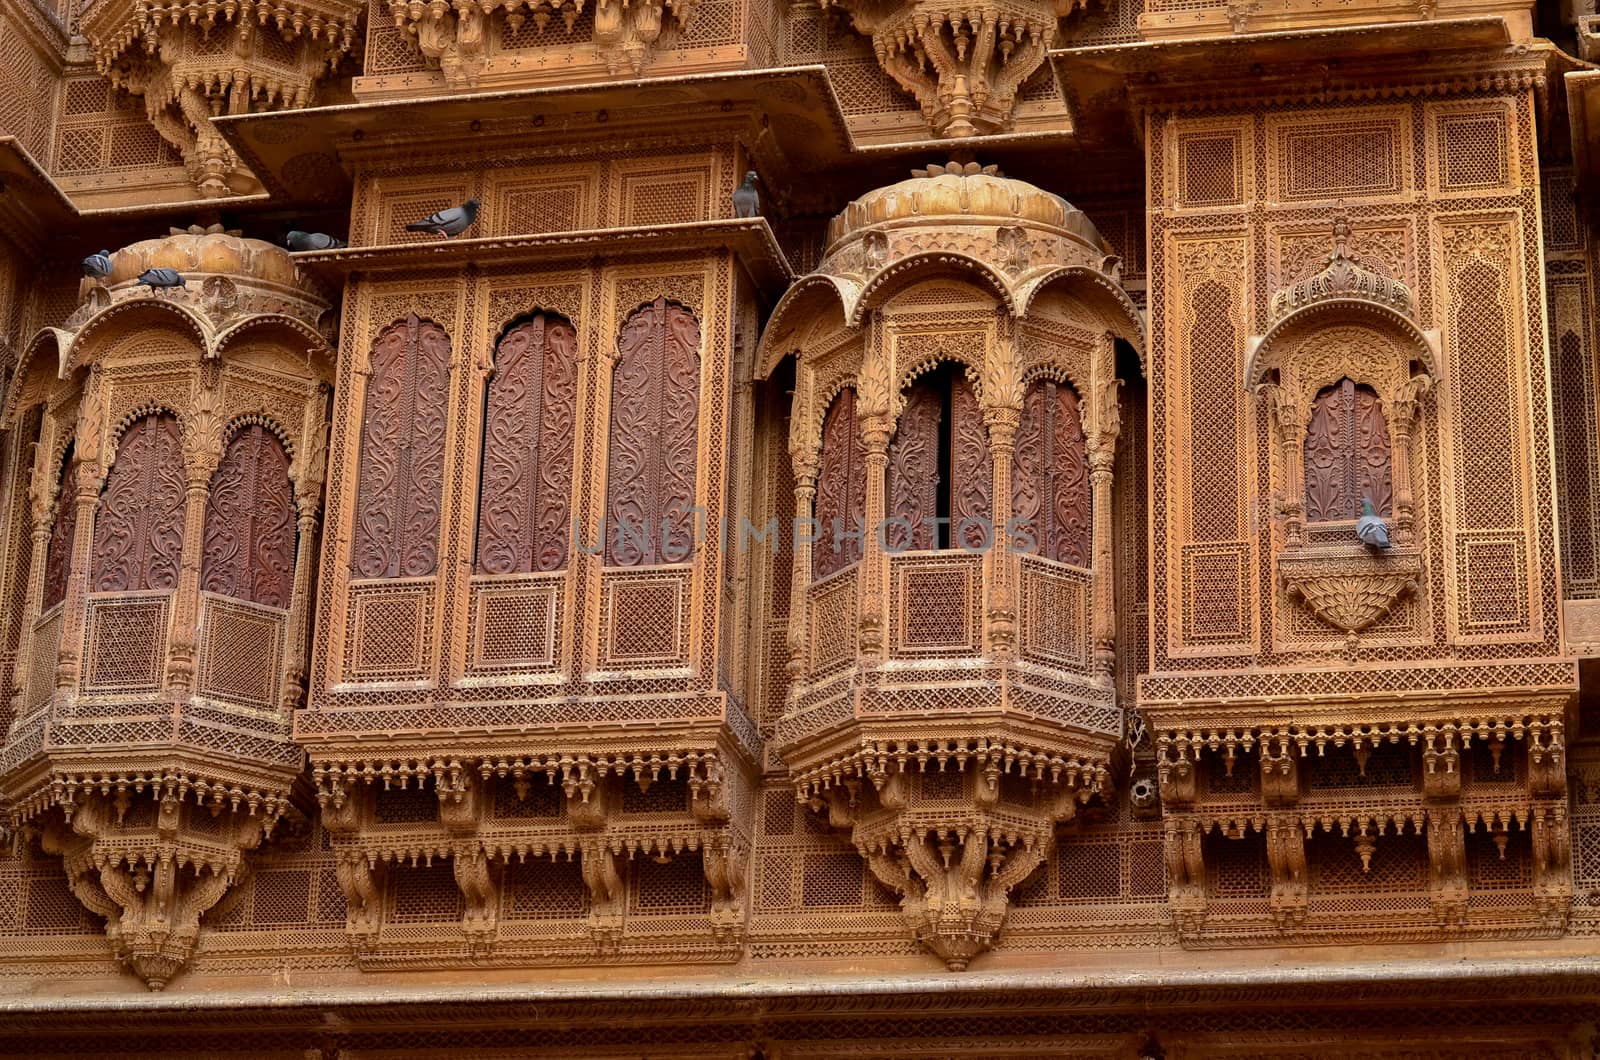 Traditional Rajasthani haveli with a decorated window at Patwon ki haveli in Jaisalmer, Rajasthan, India. Series of early-1800s palaces, now a museum featuring intricate carvings, furniture & artwork. by jayantbahel